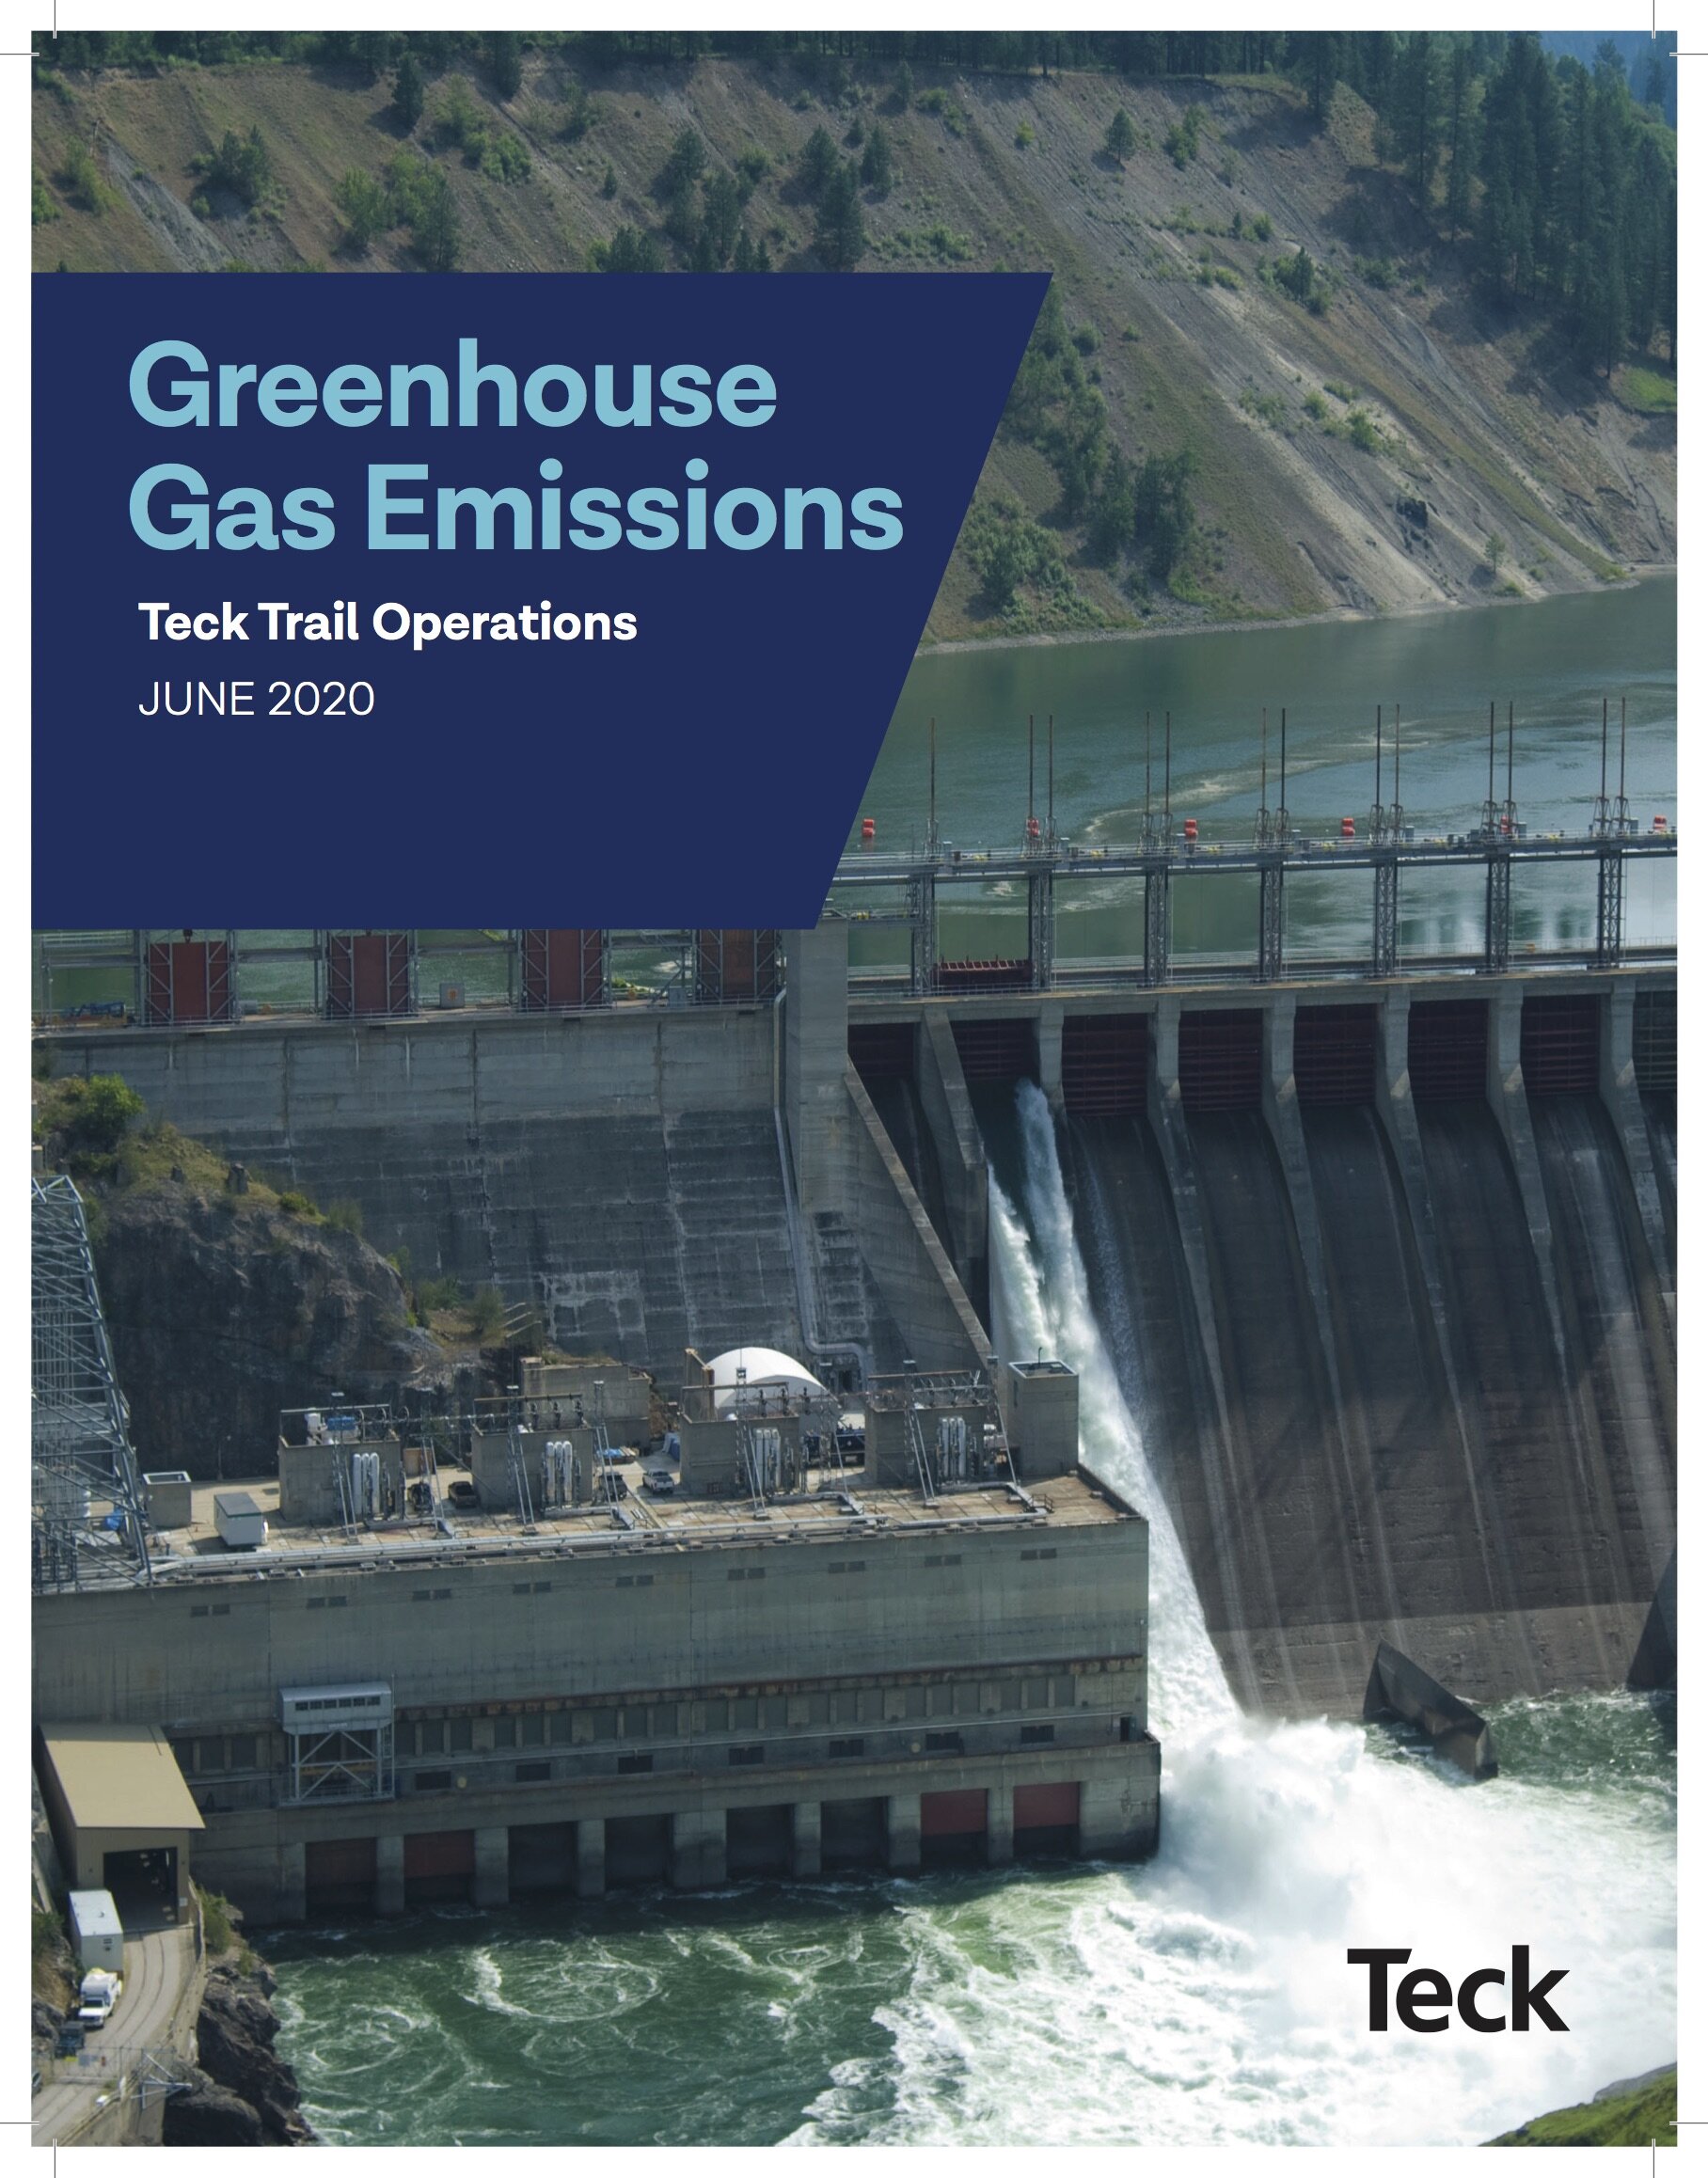 Cover Teck - Greenhouse Gas Emissions - June 2020.jpg